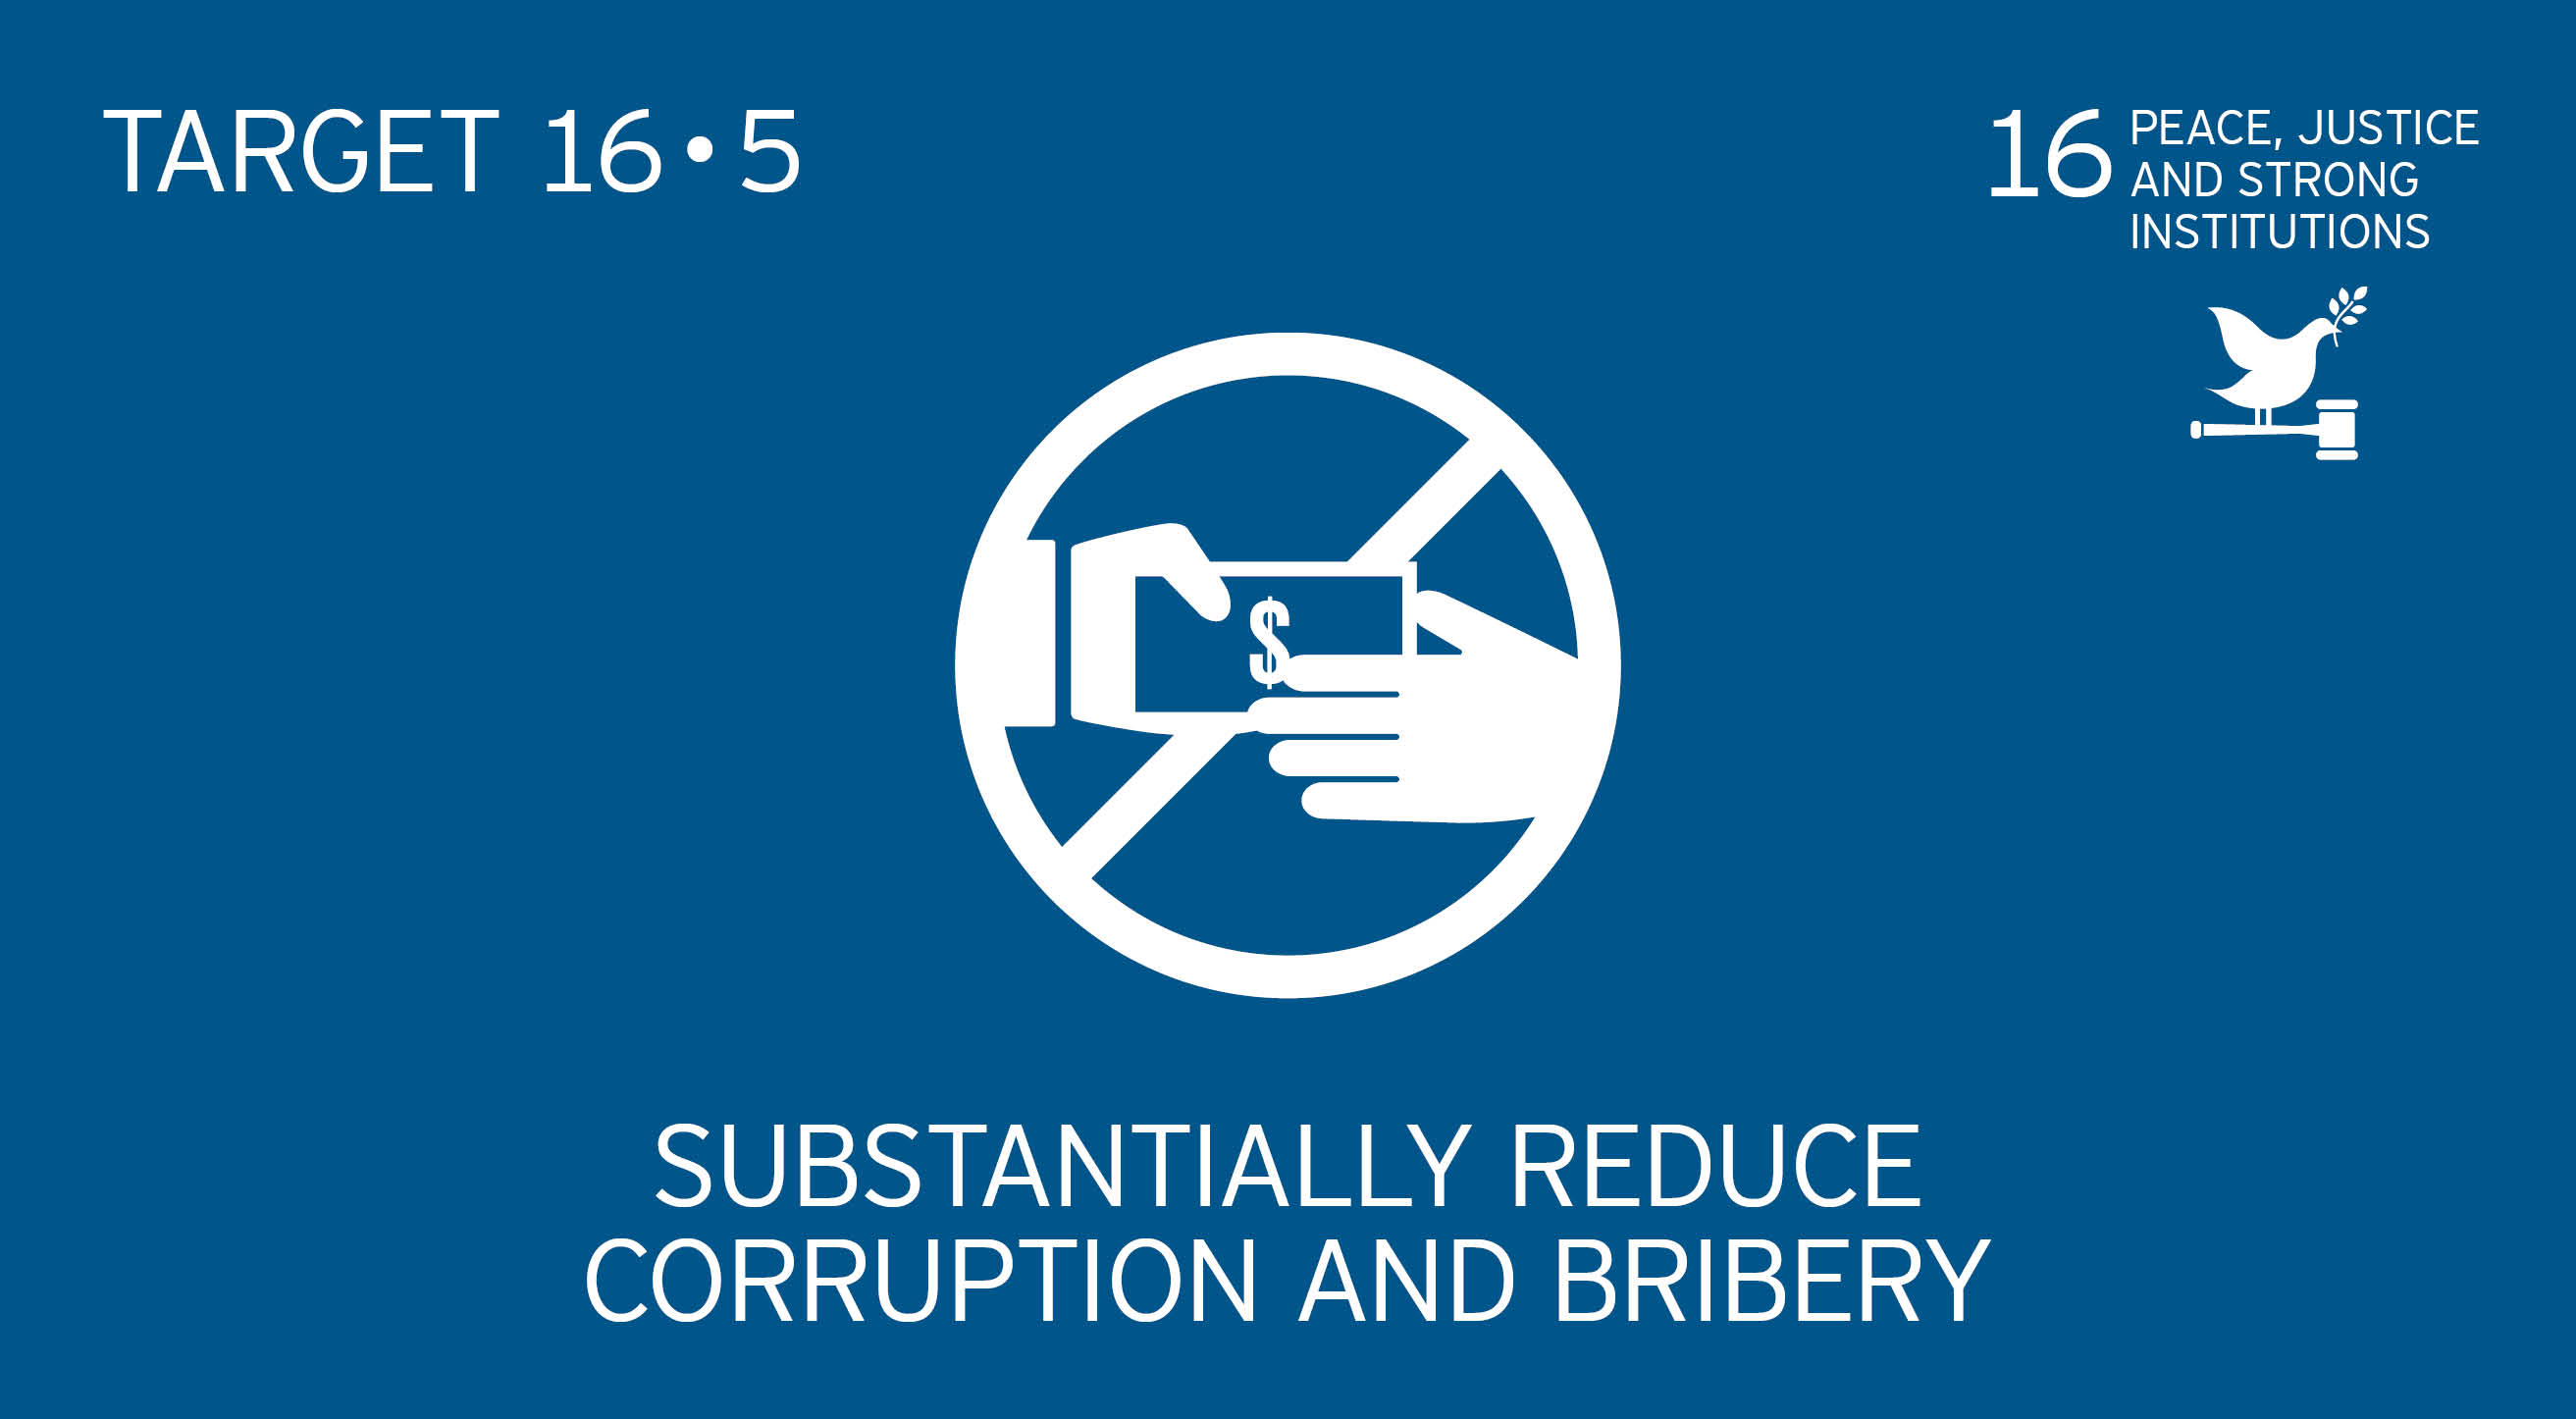 UN Sustainable Development Goals - Substantially reduce corruption and bribery